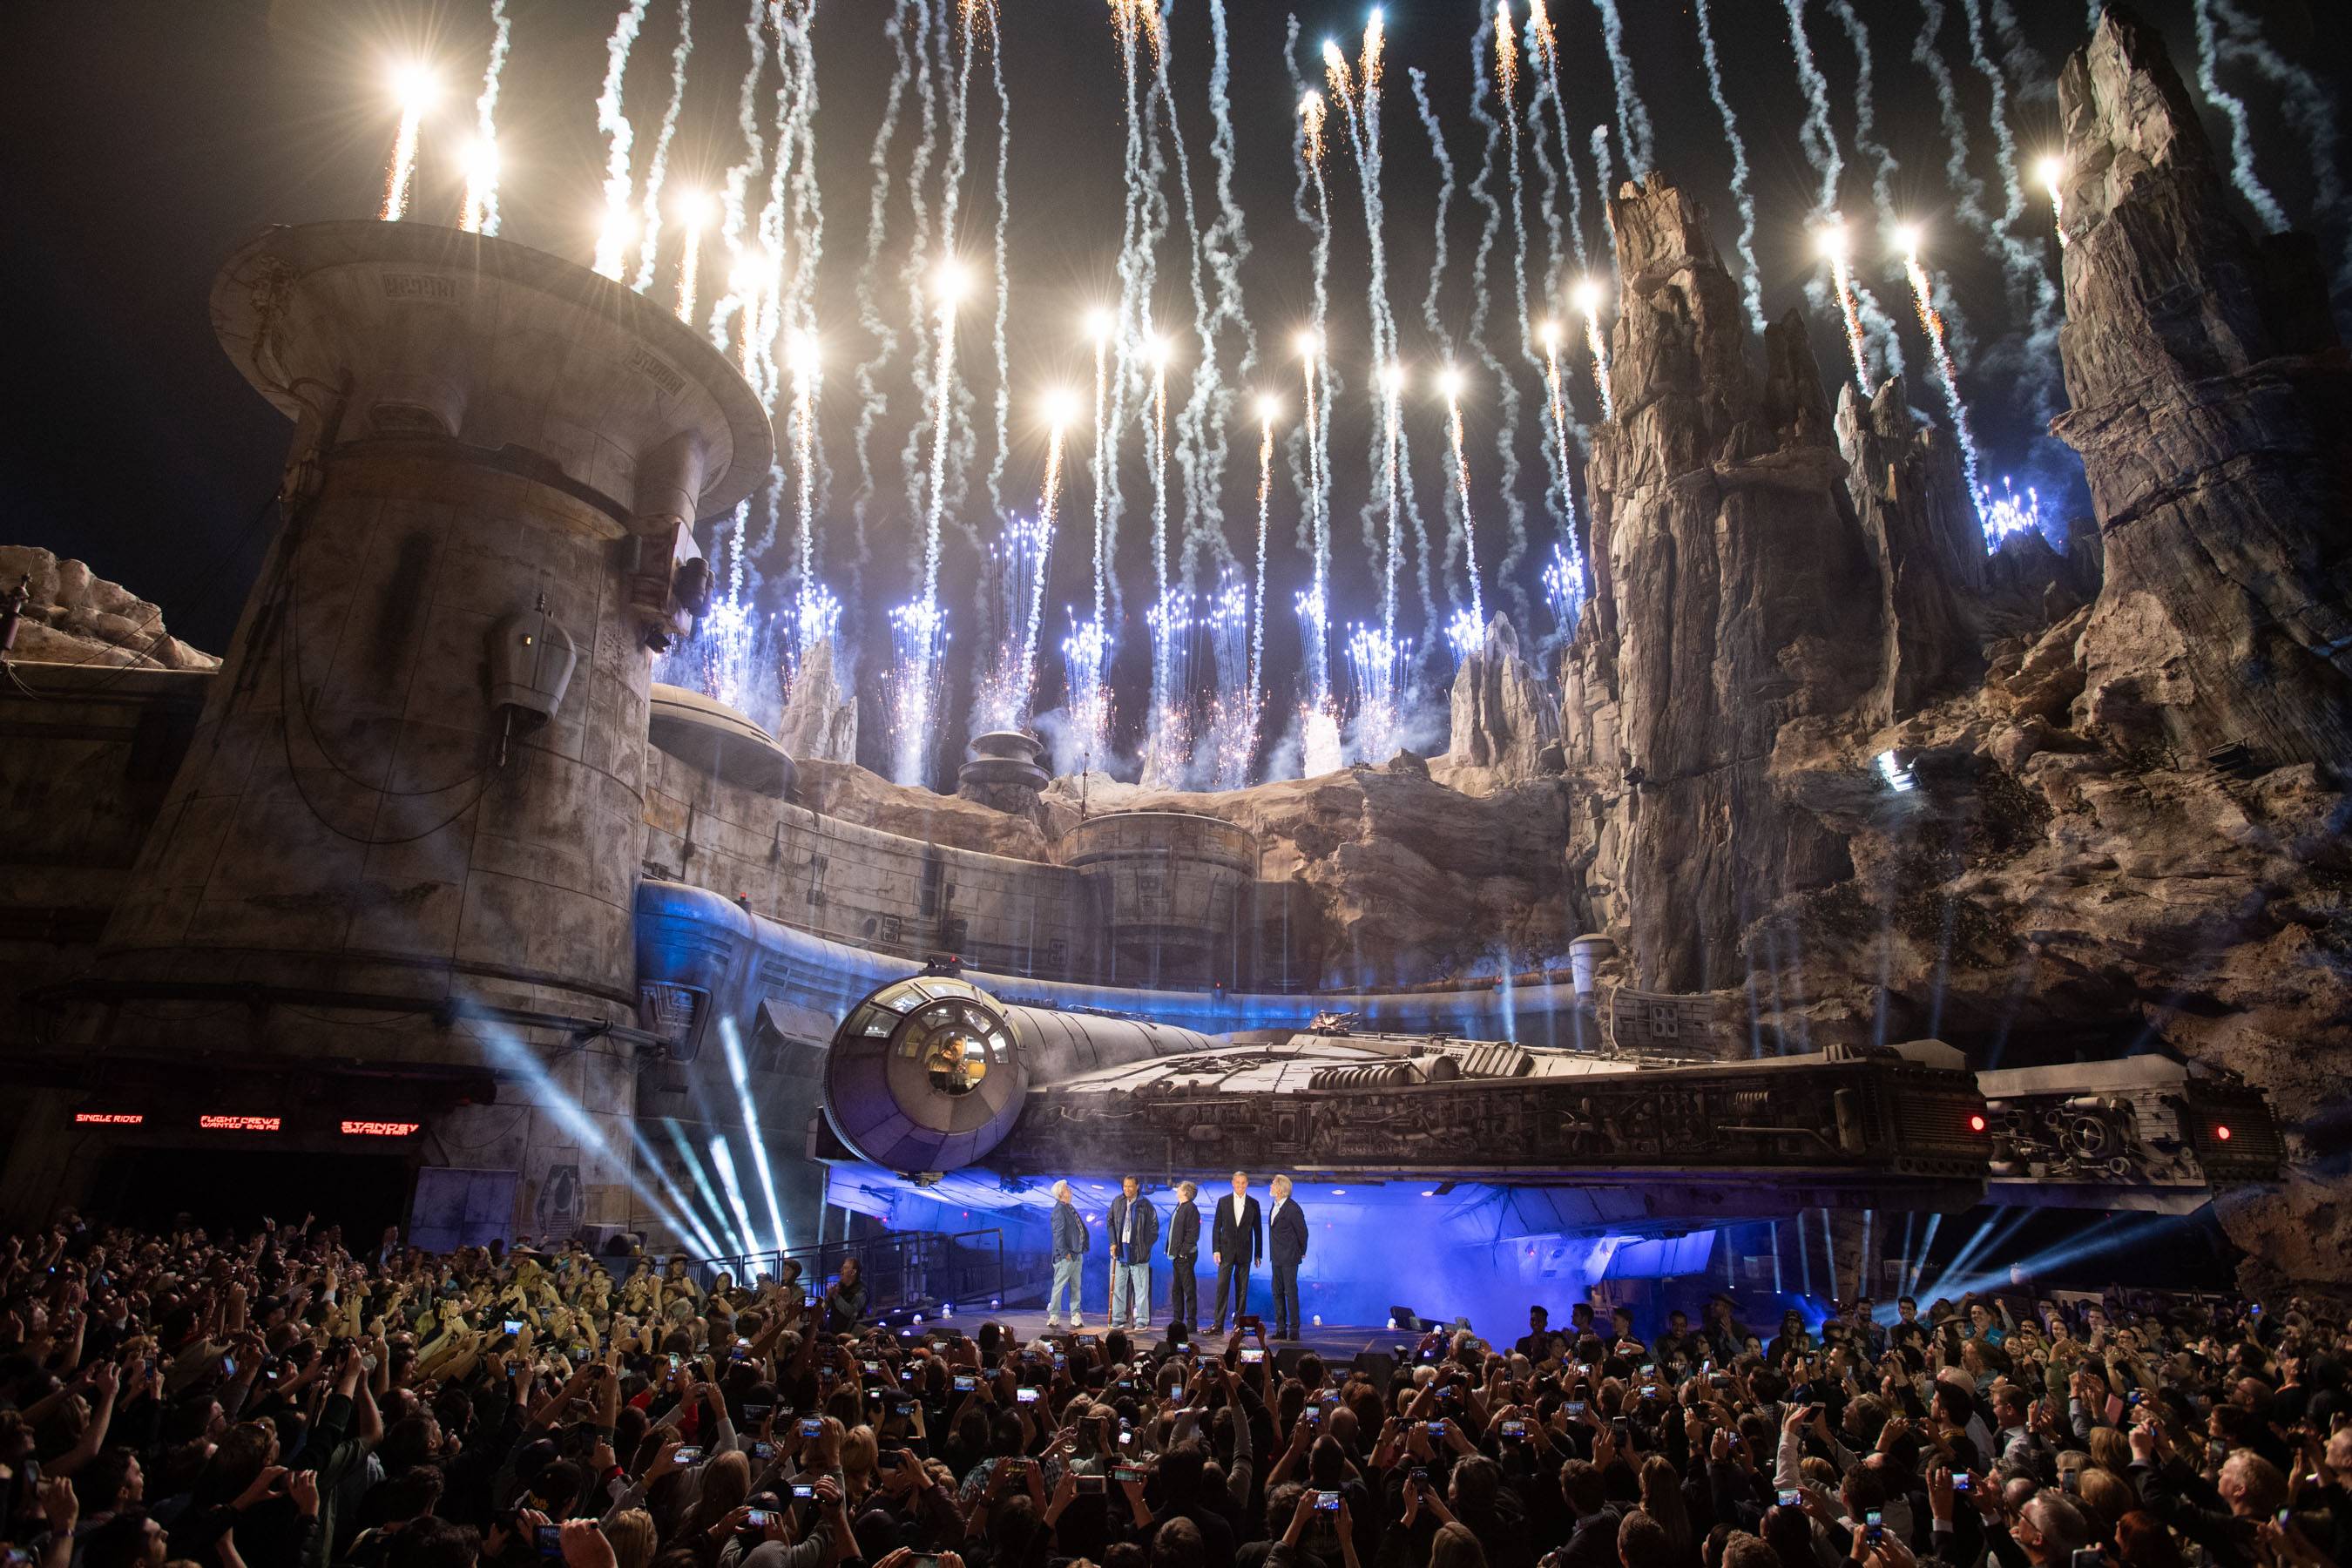 Star Wars creator George Lucas and actors Billy Dee Williams and Mark Hamill, Walt Disney Company Chairman and CEO Bob Iger and actor Harrison Ford celebrate the opening of Star Wars Galaxy's Edge